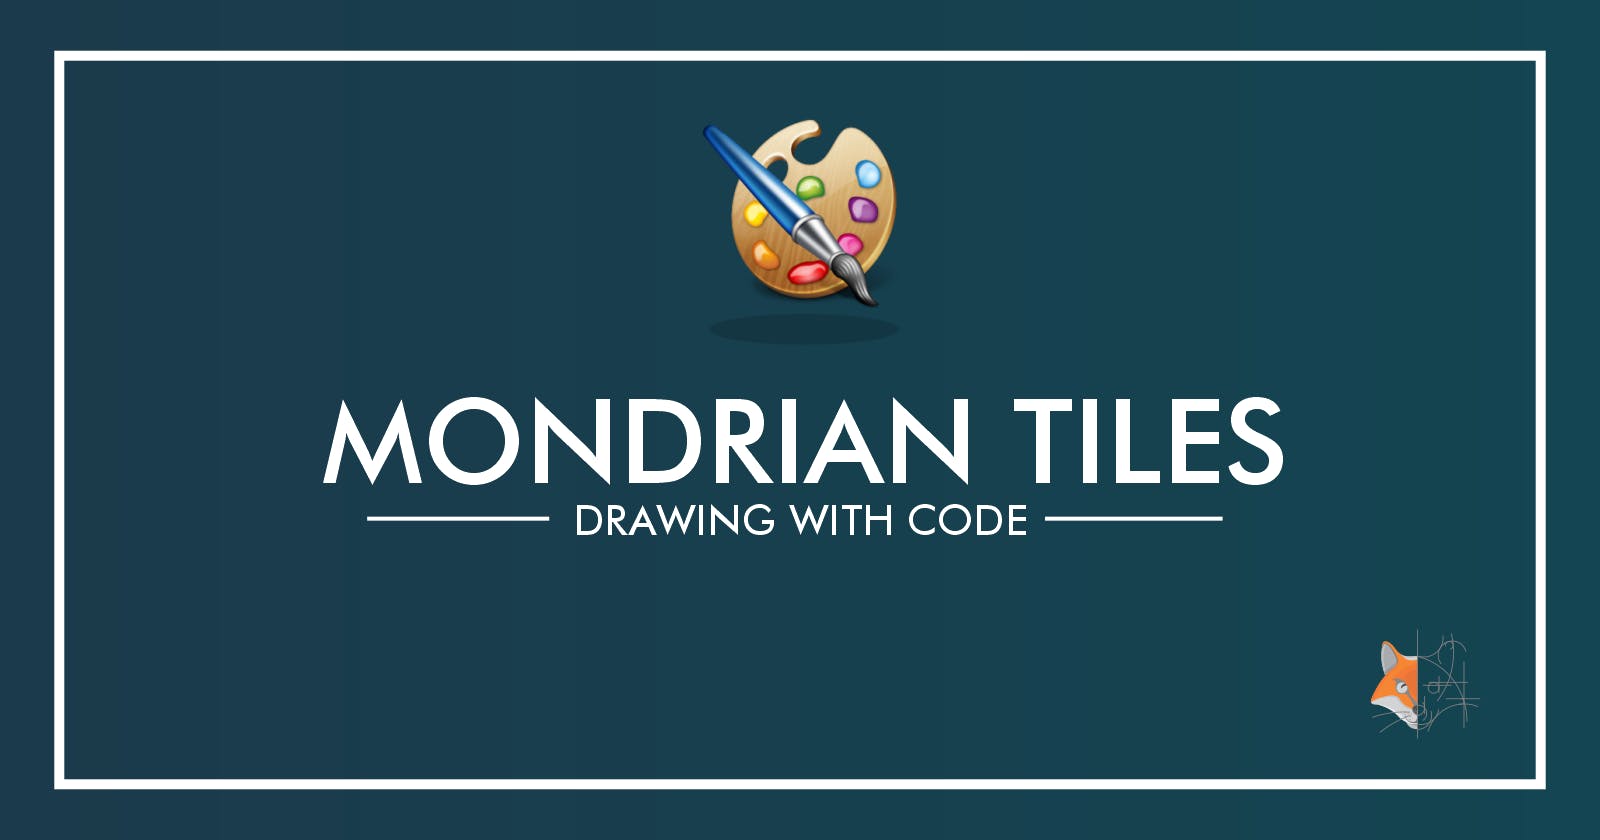 05. Mondrian Tiles - Drawing with Code